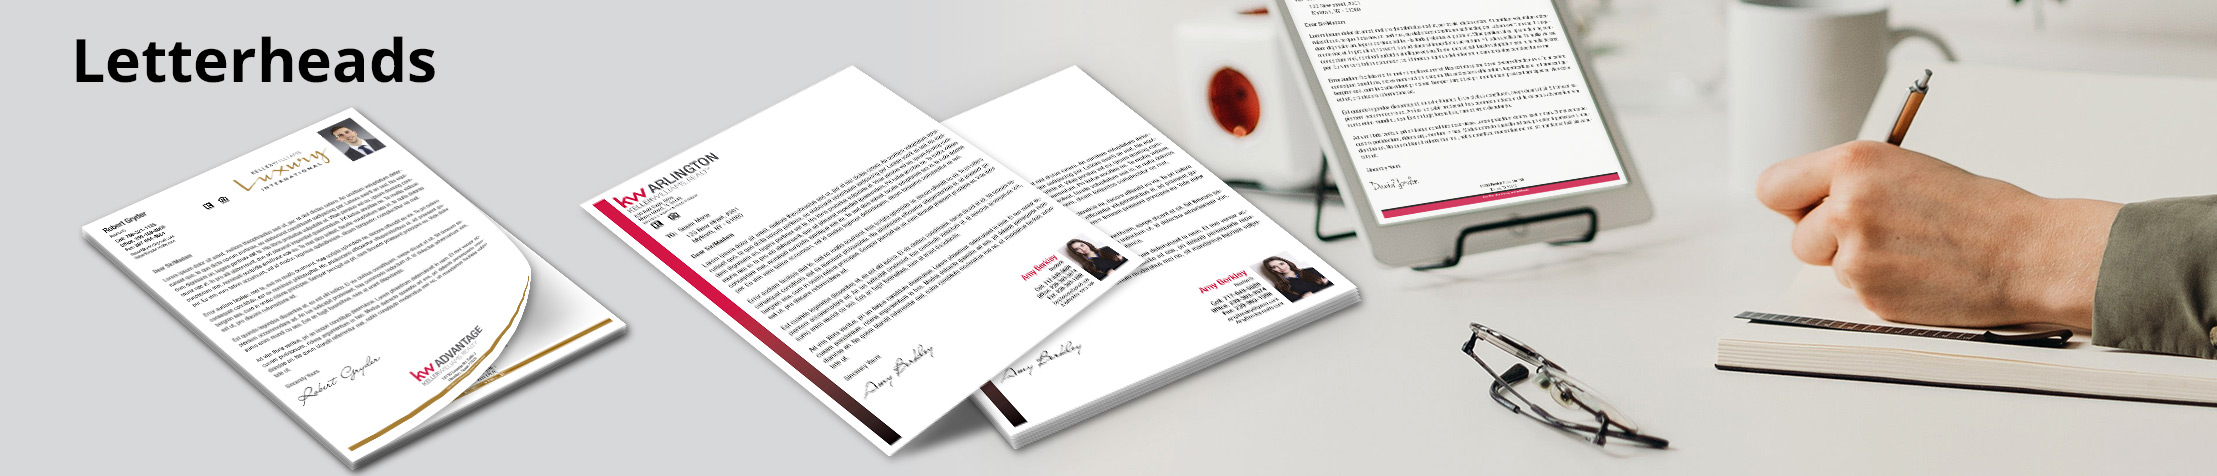 Keller Williams Real Estate Personalized Letterheads - KW approved vendor stationery, custom letterhead templates for realty offices and real estate agents | BestPrintBuy.com